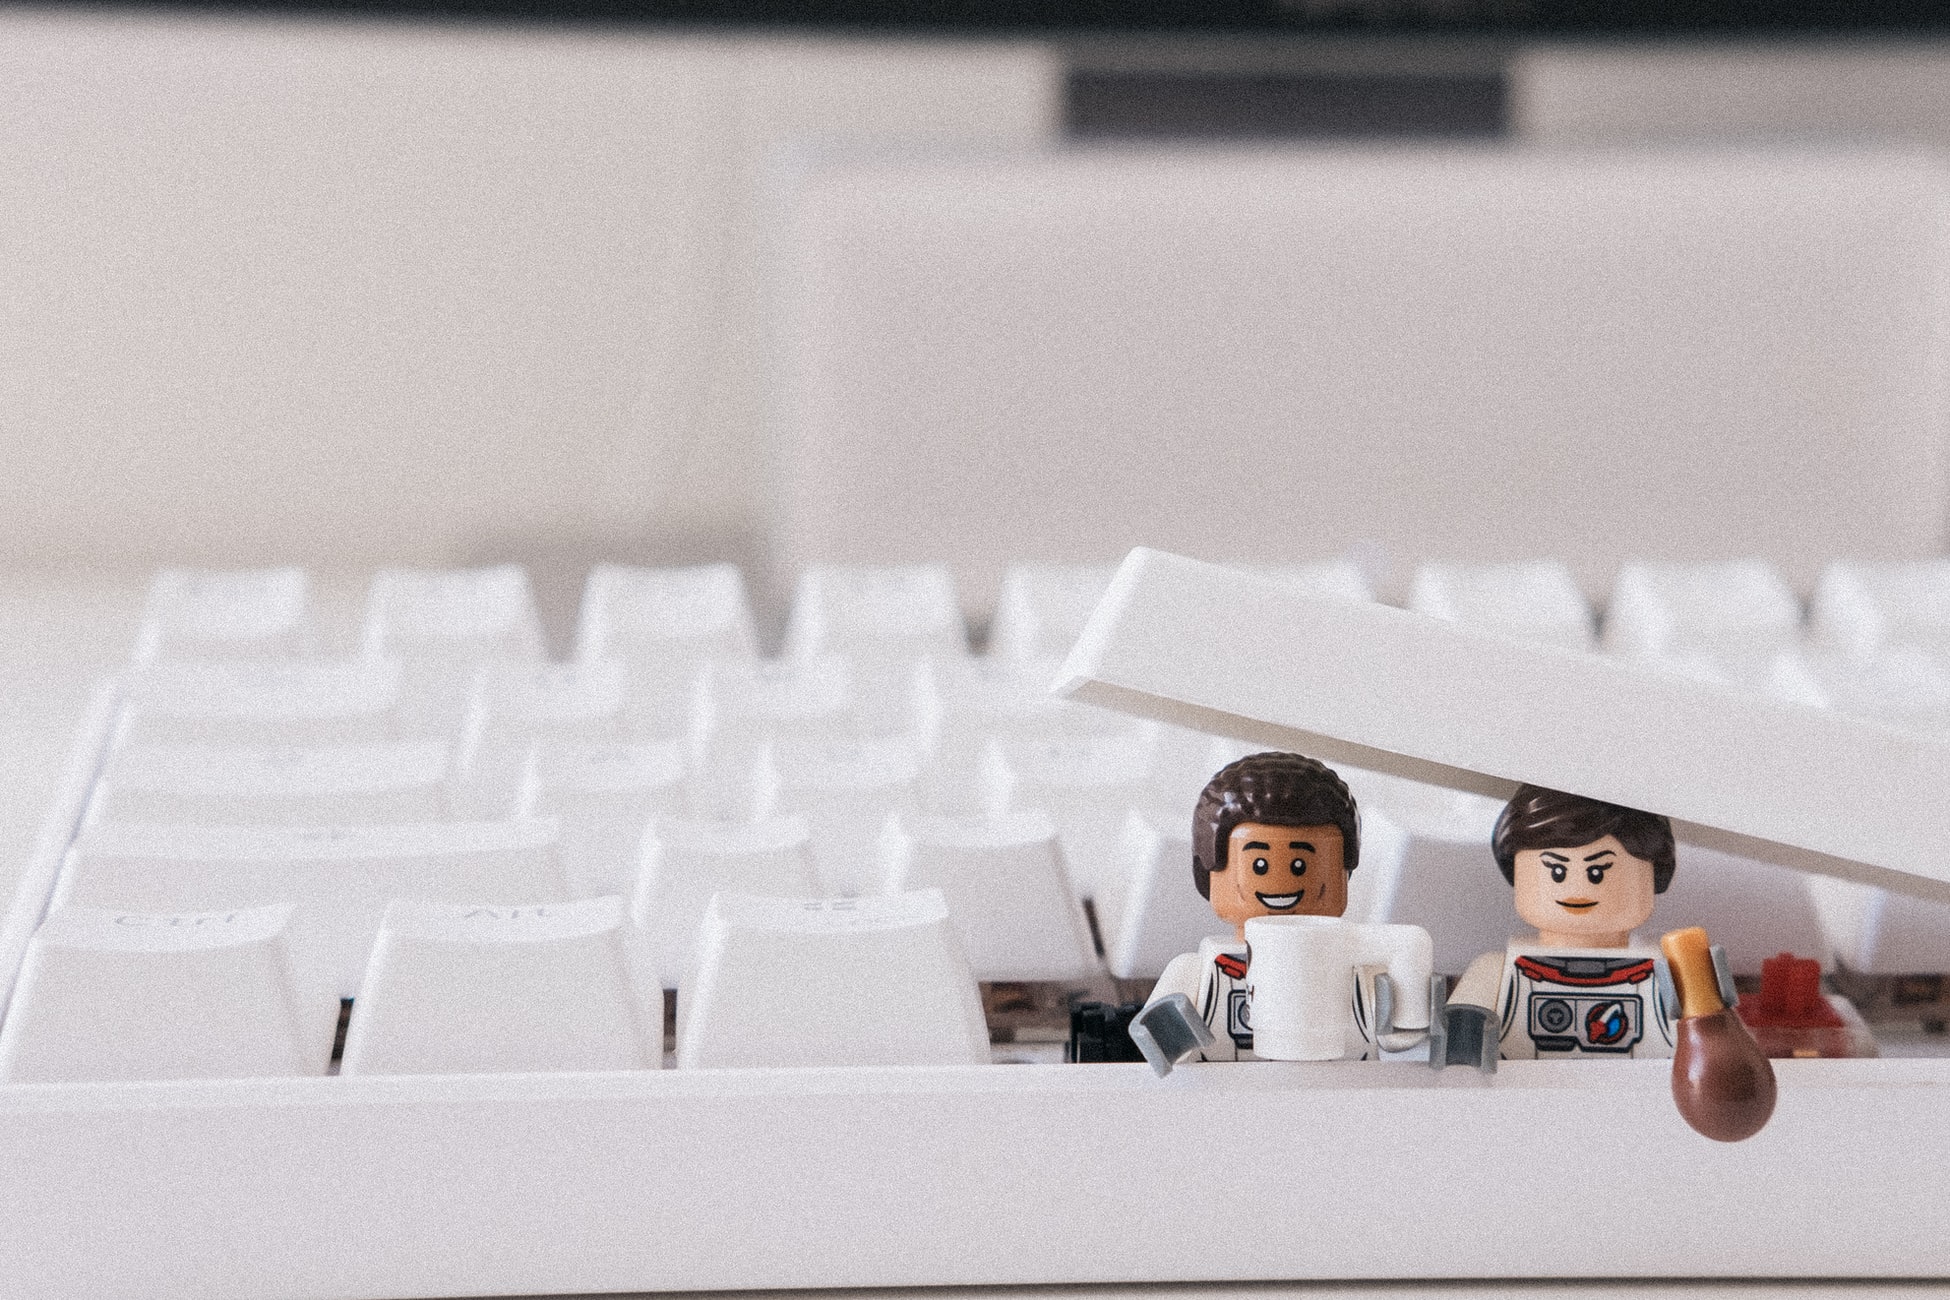 two Lego figured popping up from under the space bar on a keyboard